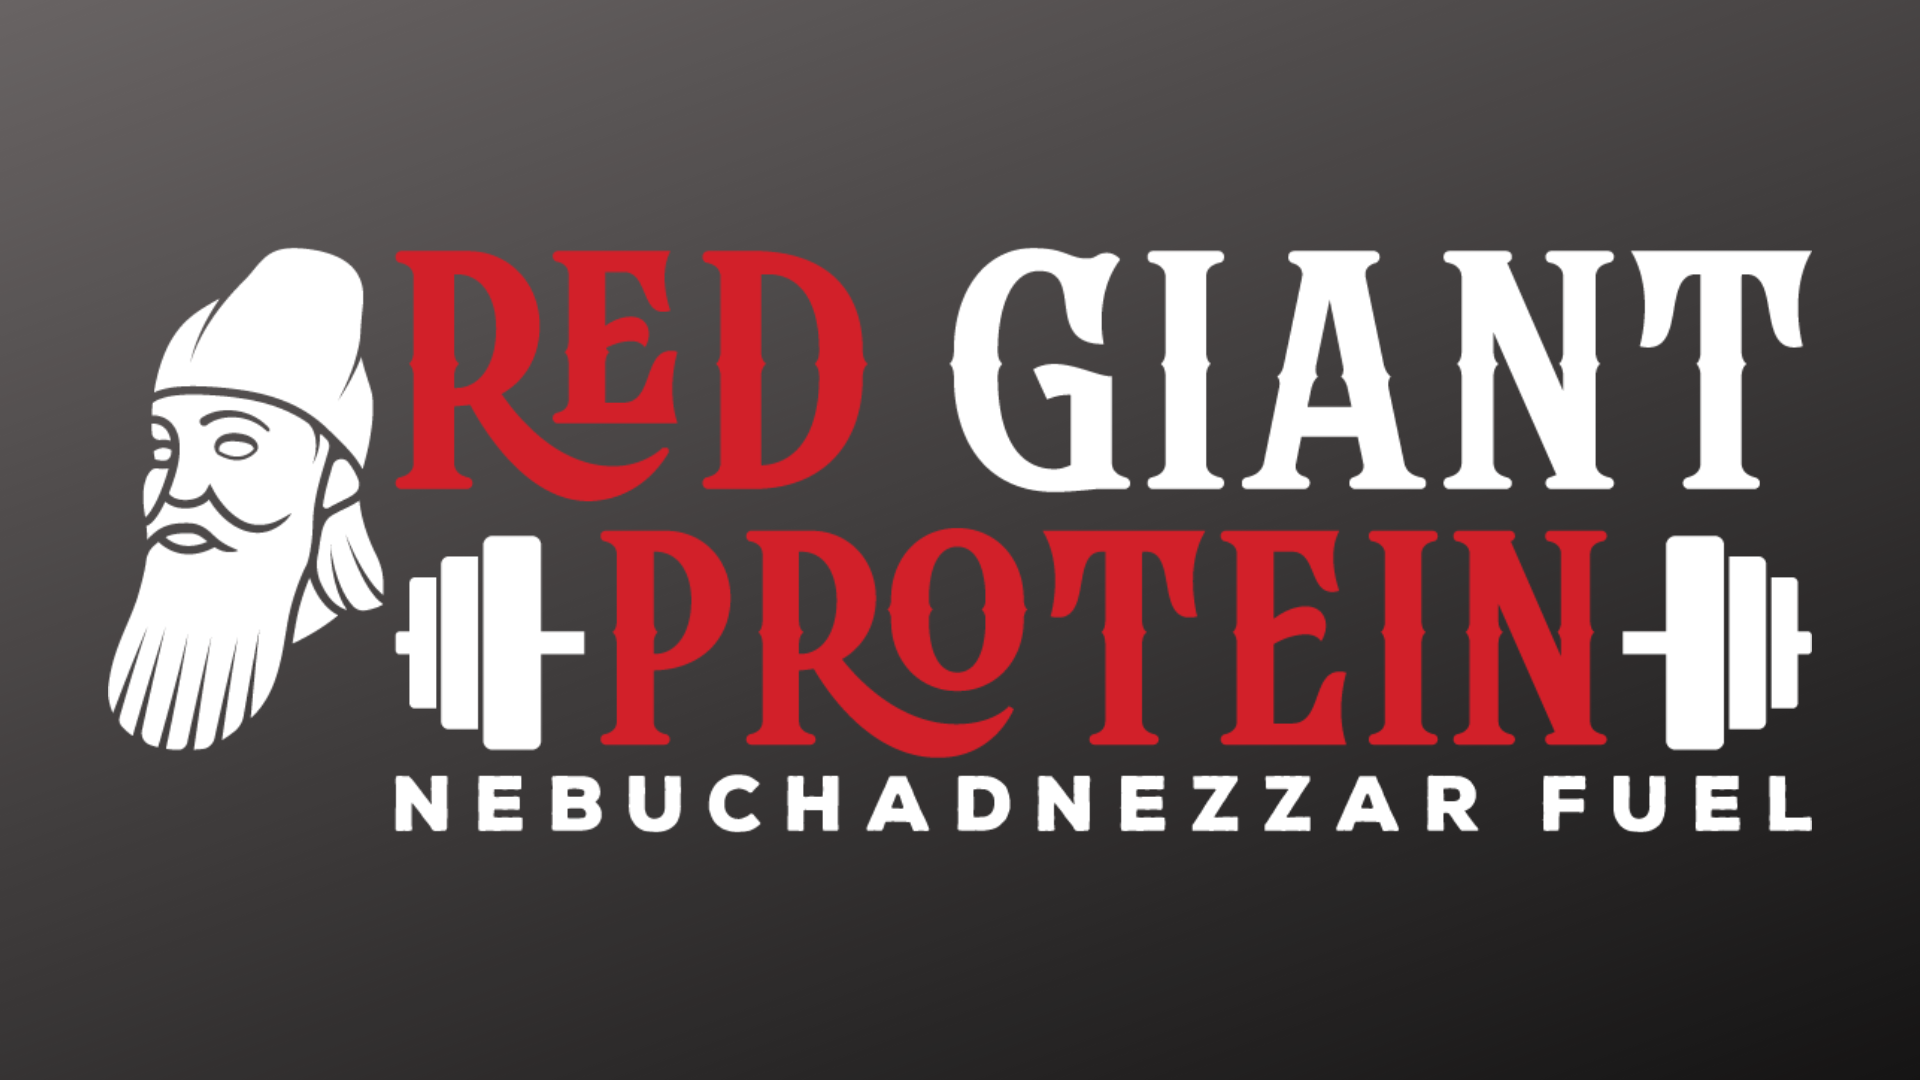 Red Giant Protein